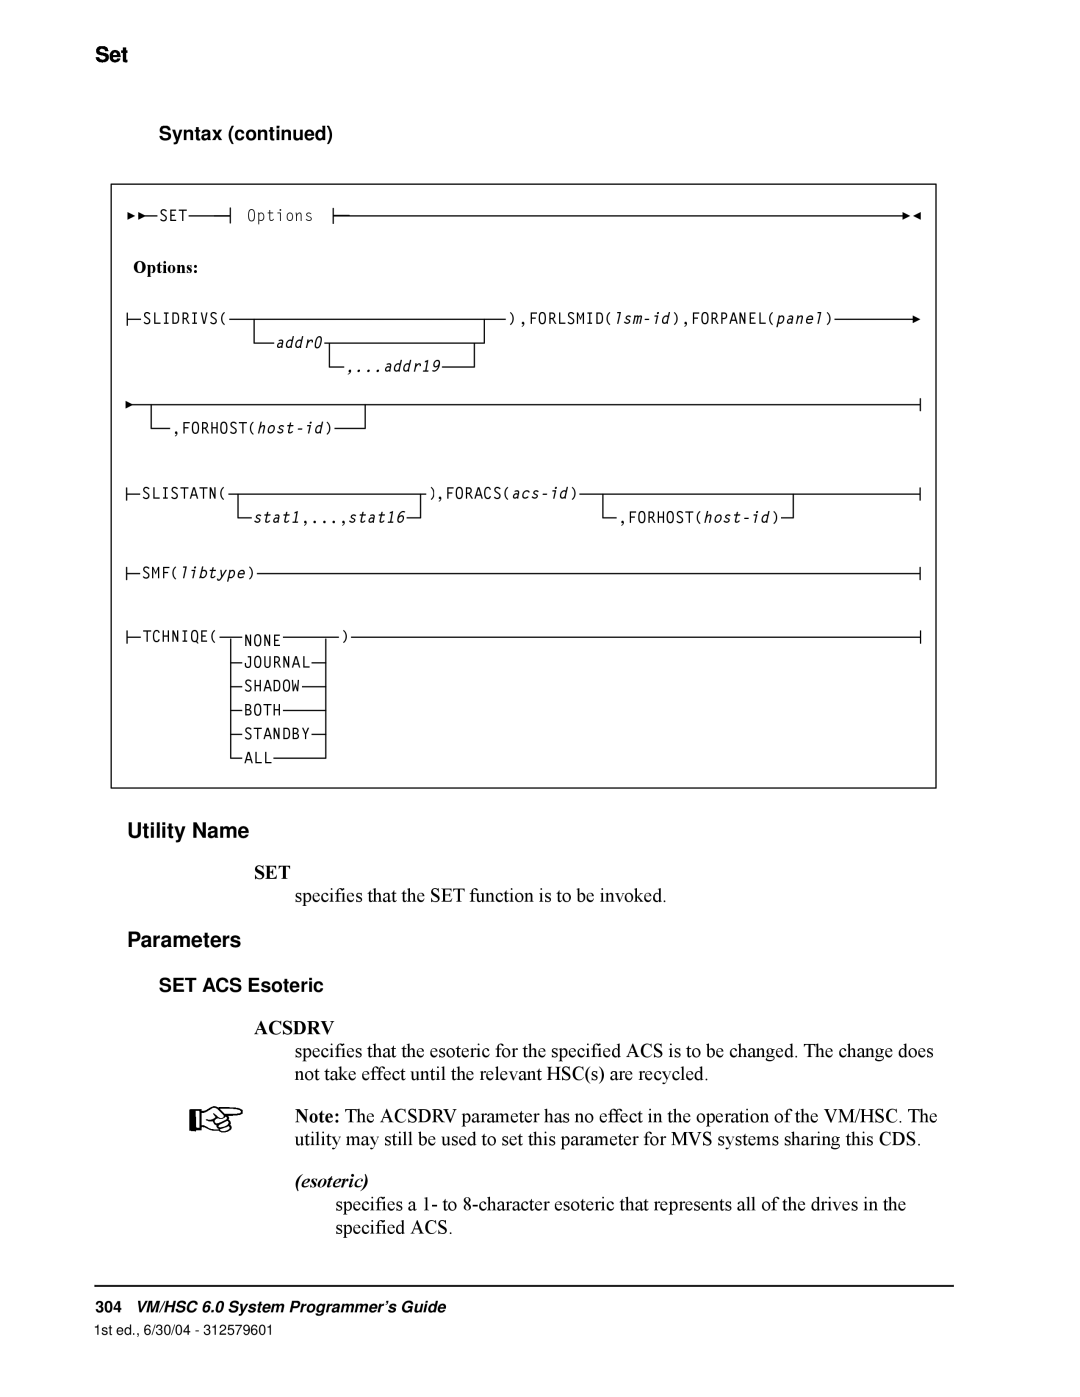 StorageTek 6 manual SET ACS Esoteric, esoteric, Utility Name, Parameters, Syntax continued 